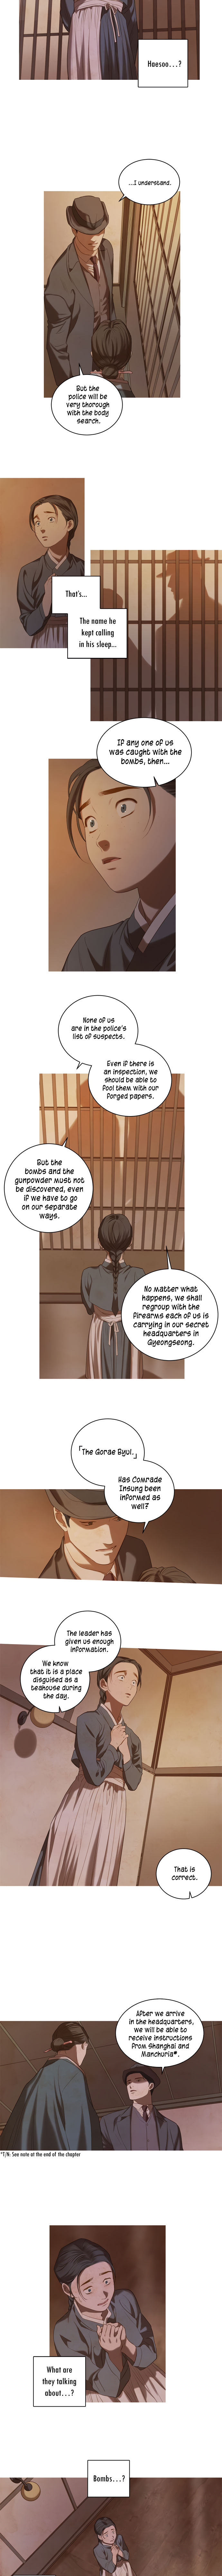 The Whale Star - The Gyeongseong Mermaid - Chapter 7 Page 4